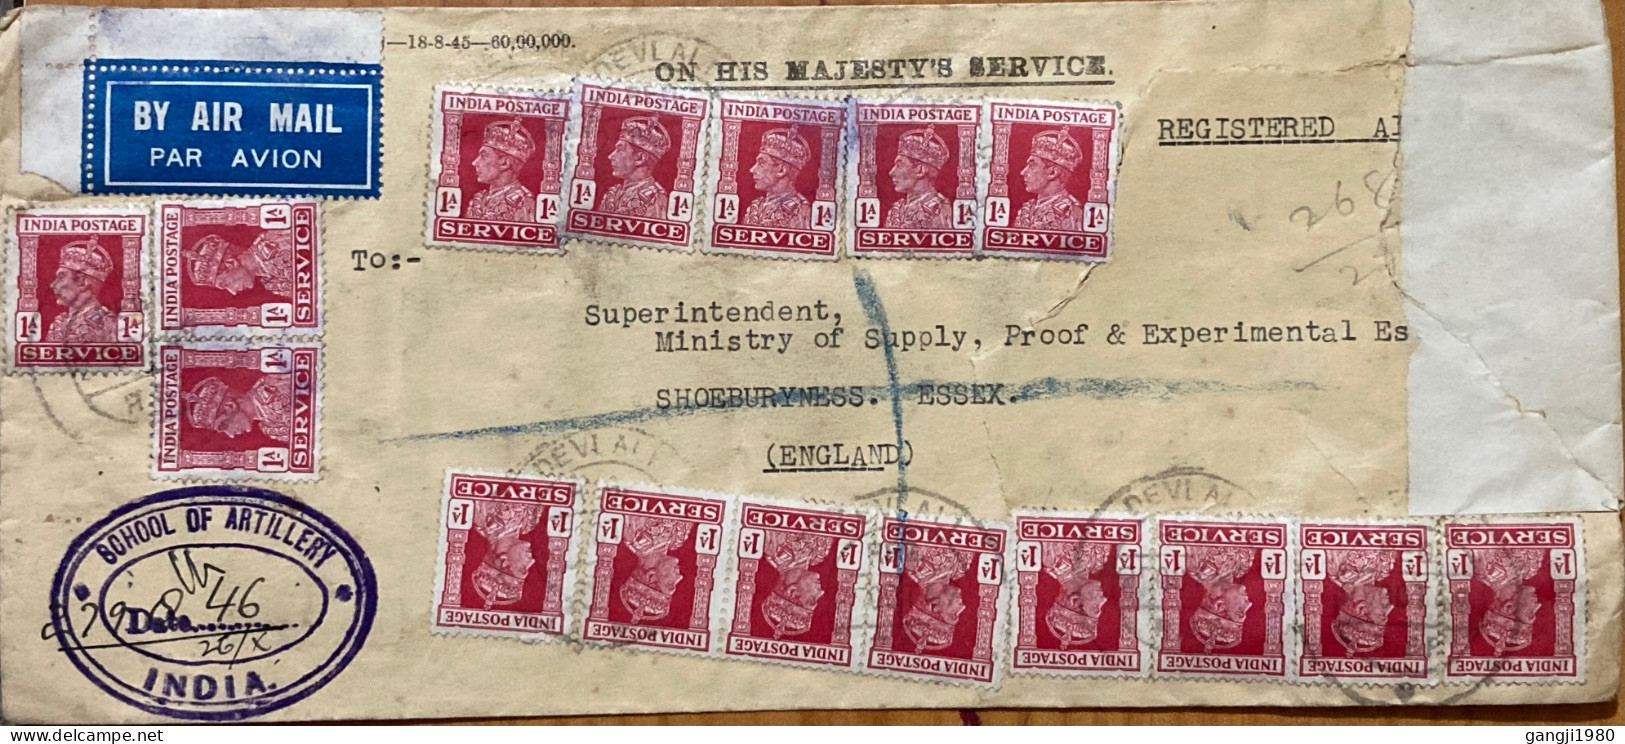 INDIA 1940, REGISTER COVER, USED TO ENGLAND, MILITARY ARMY, SCHOOL OF ARTILLERY, DEVLALI CITY CANCEL, MULTI 16 KING STAM - 1936-47 King George VI